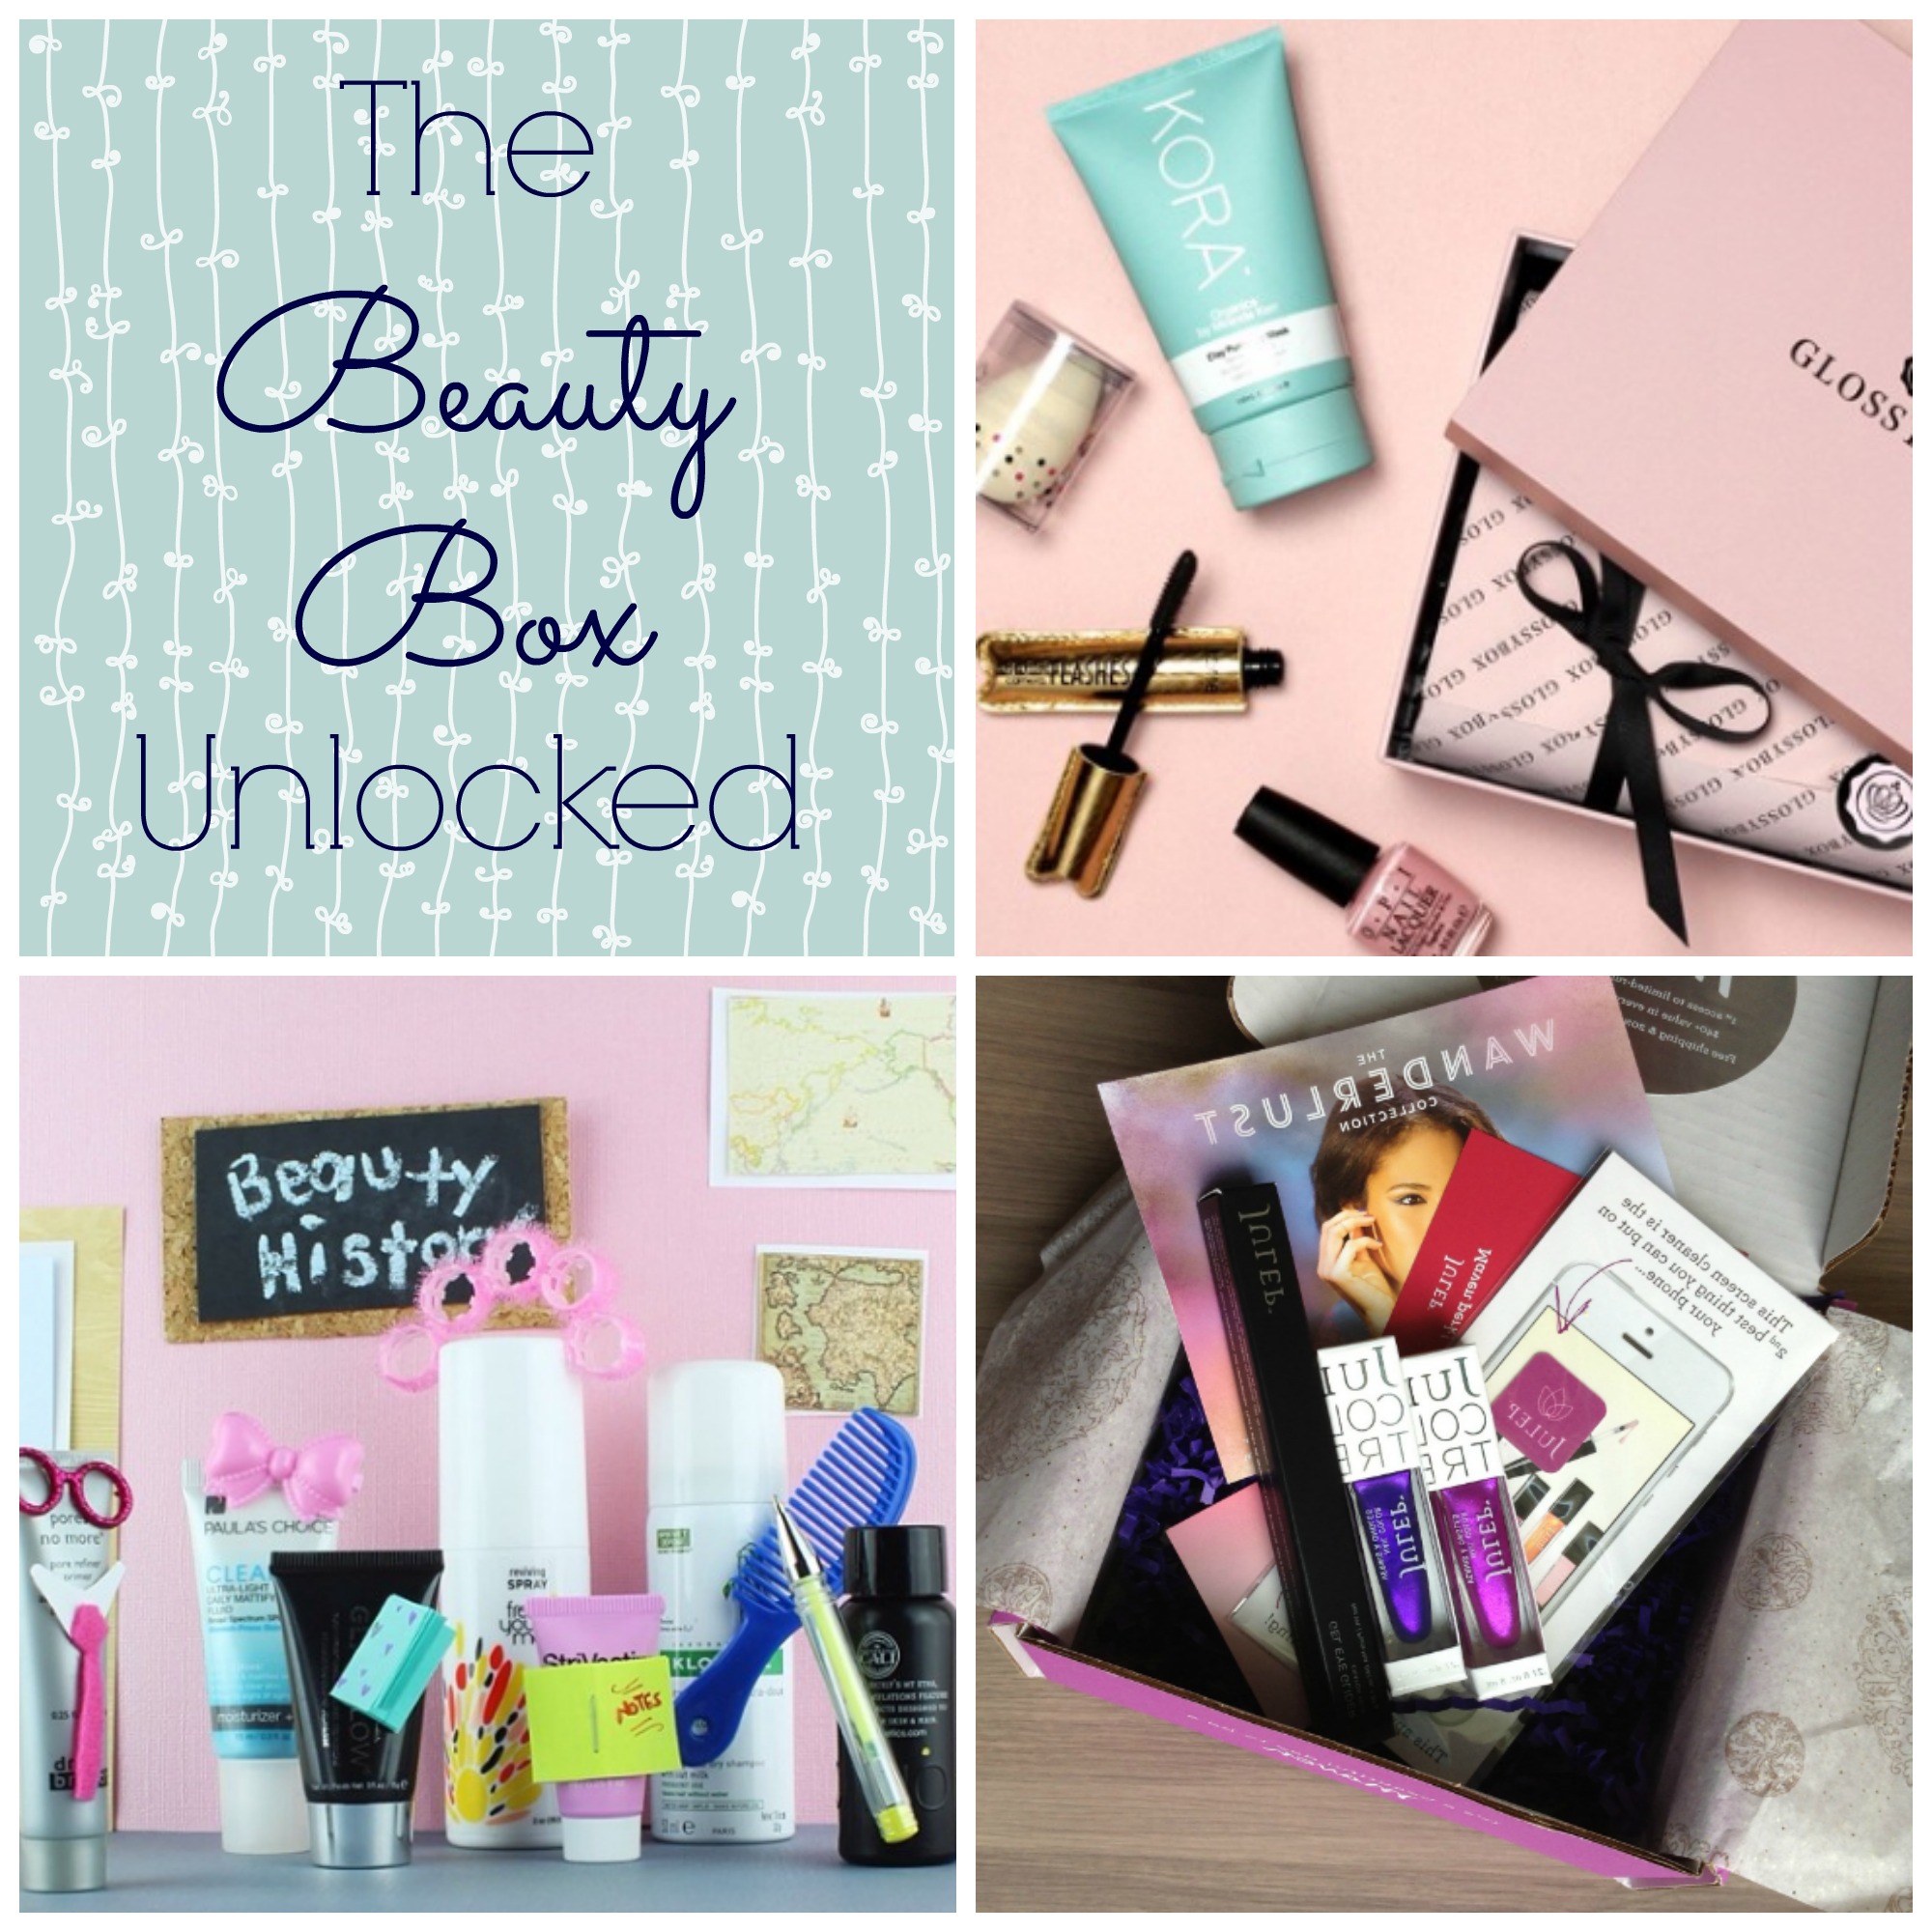 Mail order beauty boxes